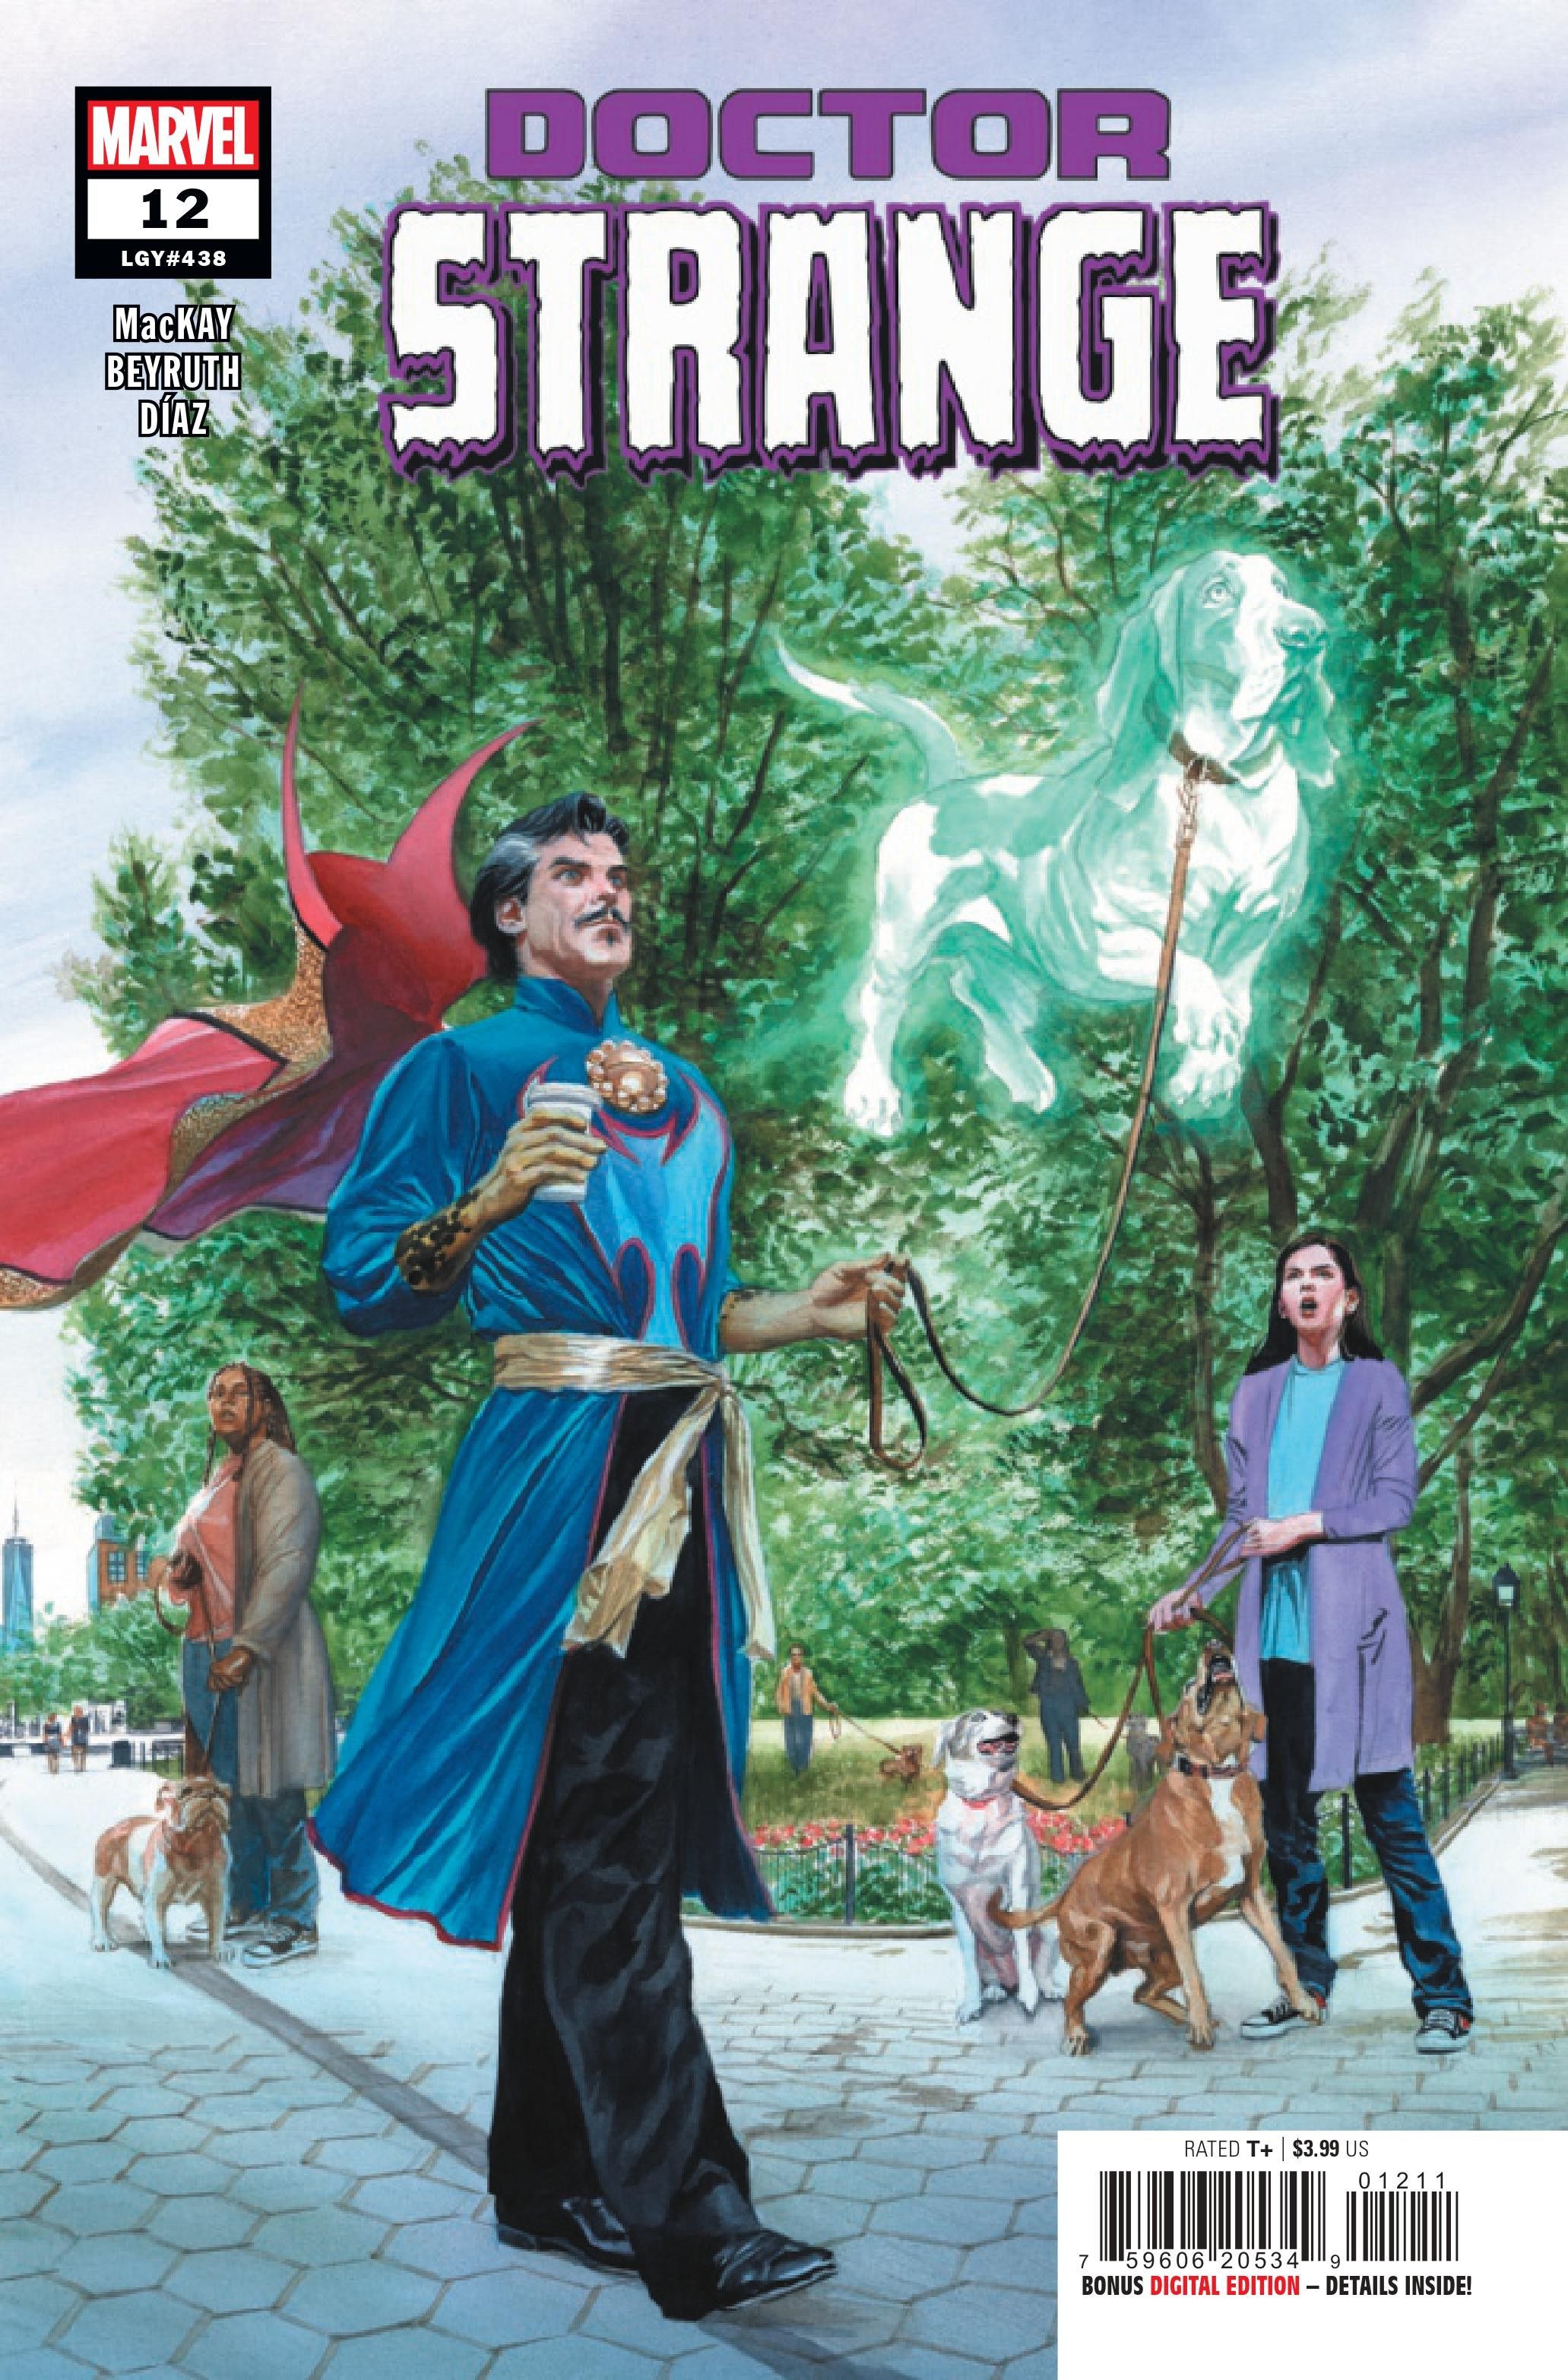 Image of Doctor Strange walking his ghost dog, Bats, who is floating in the air.